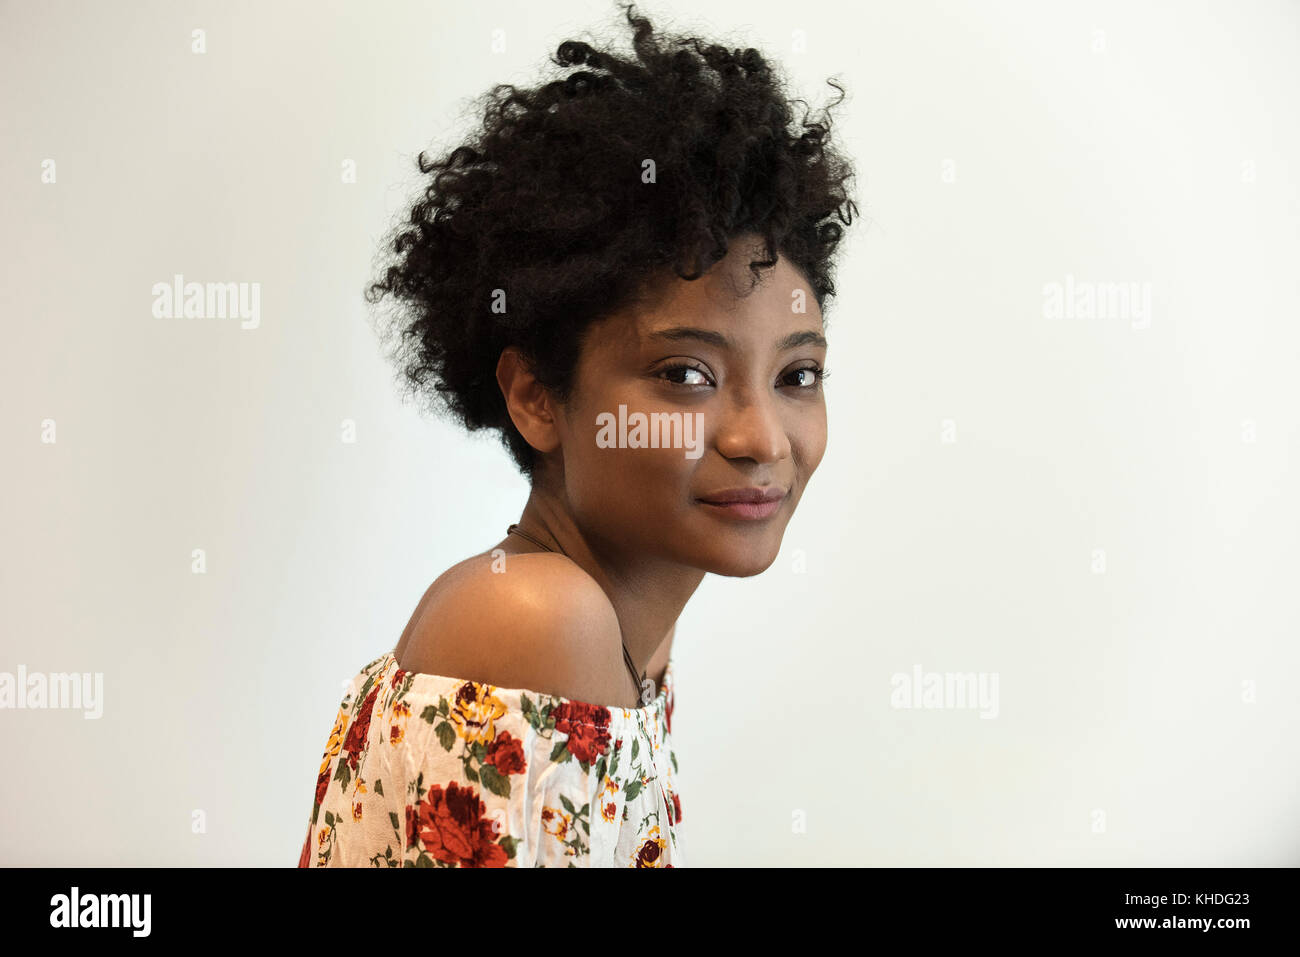 Young woman, portrait Stock Photo